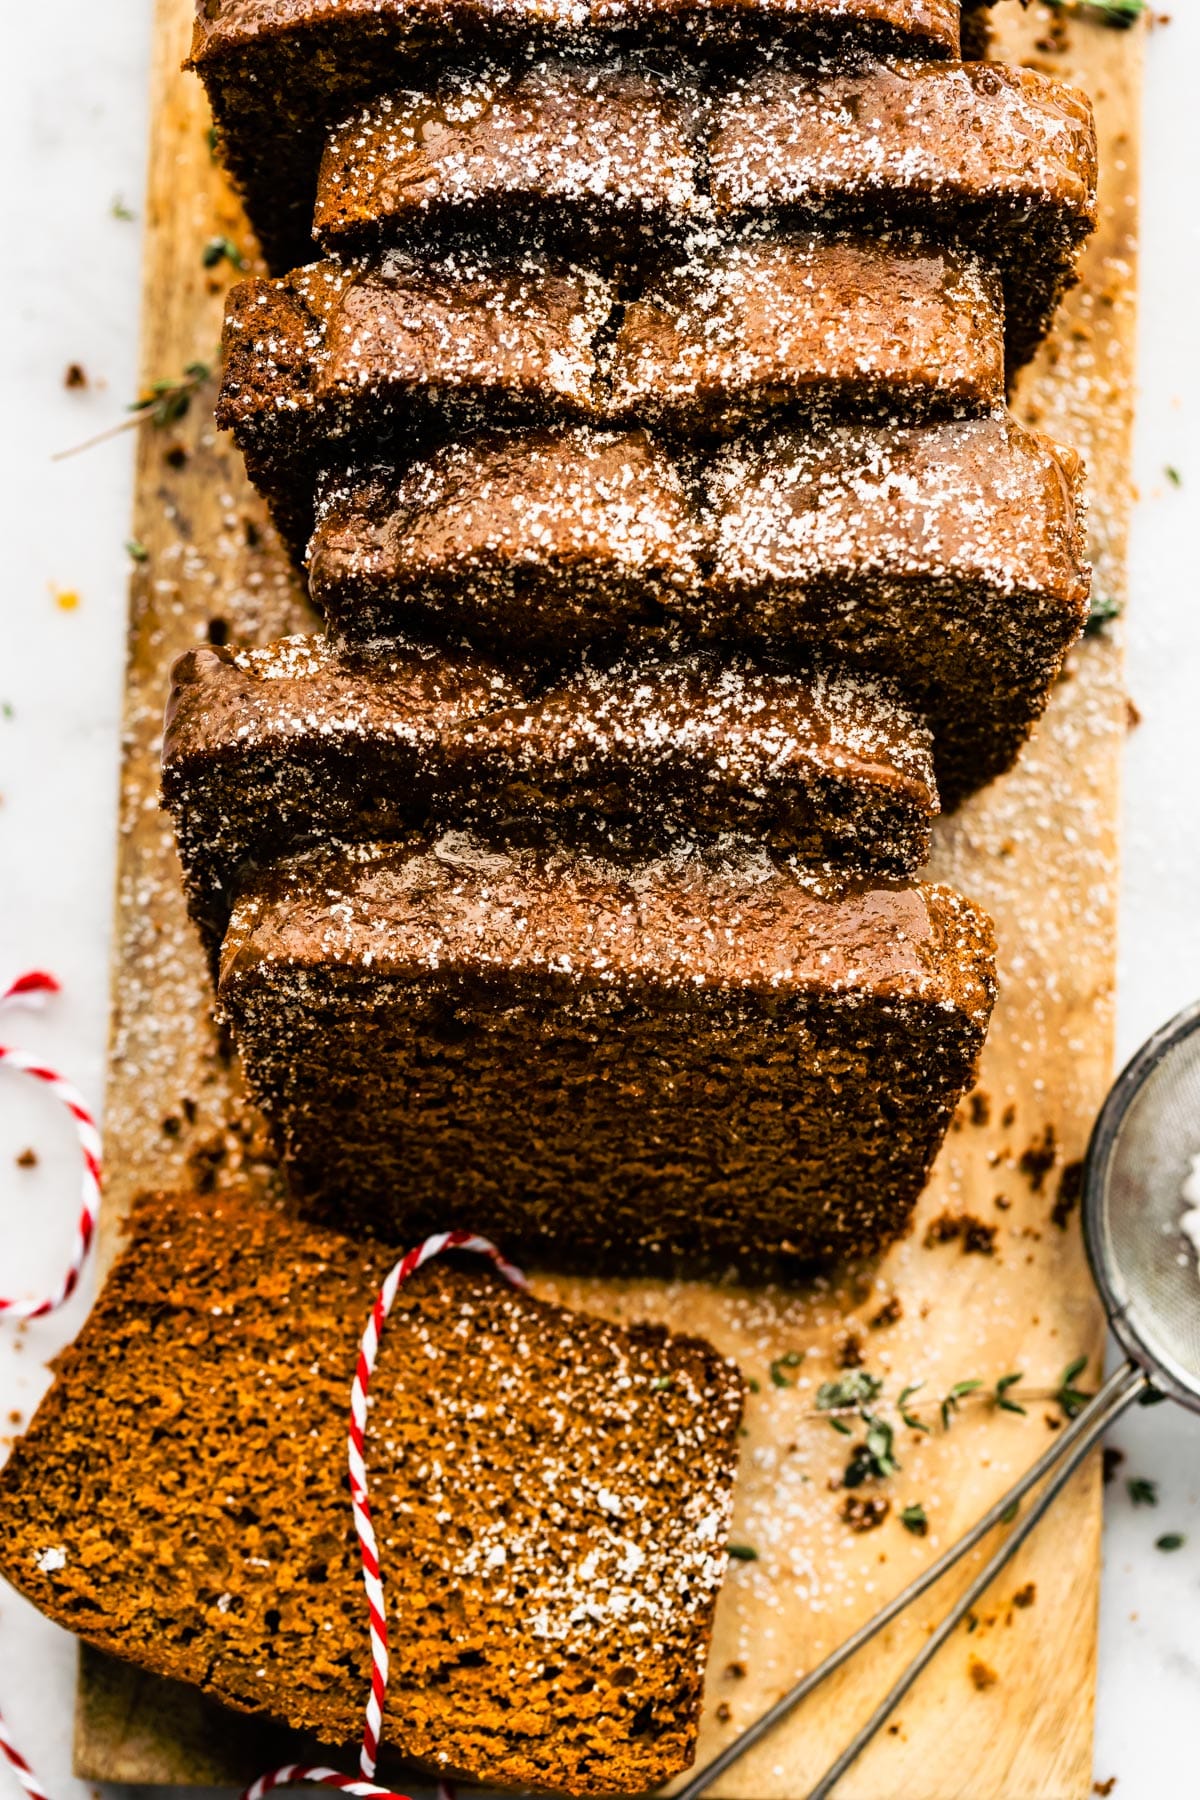 Sliced gingerbread on a wooden cutting board sprinkled with powdered sugar.